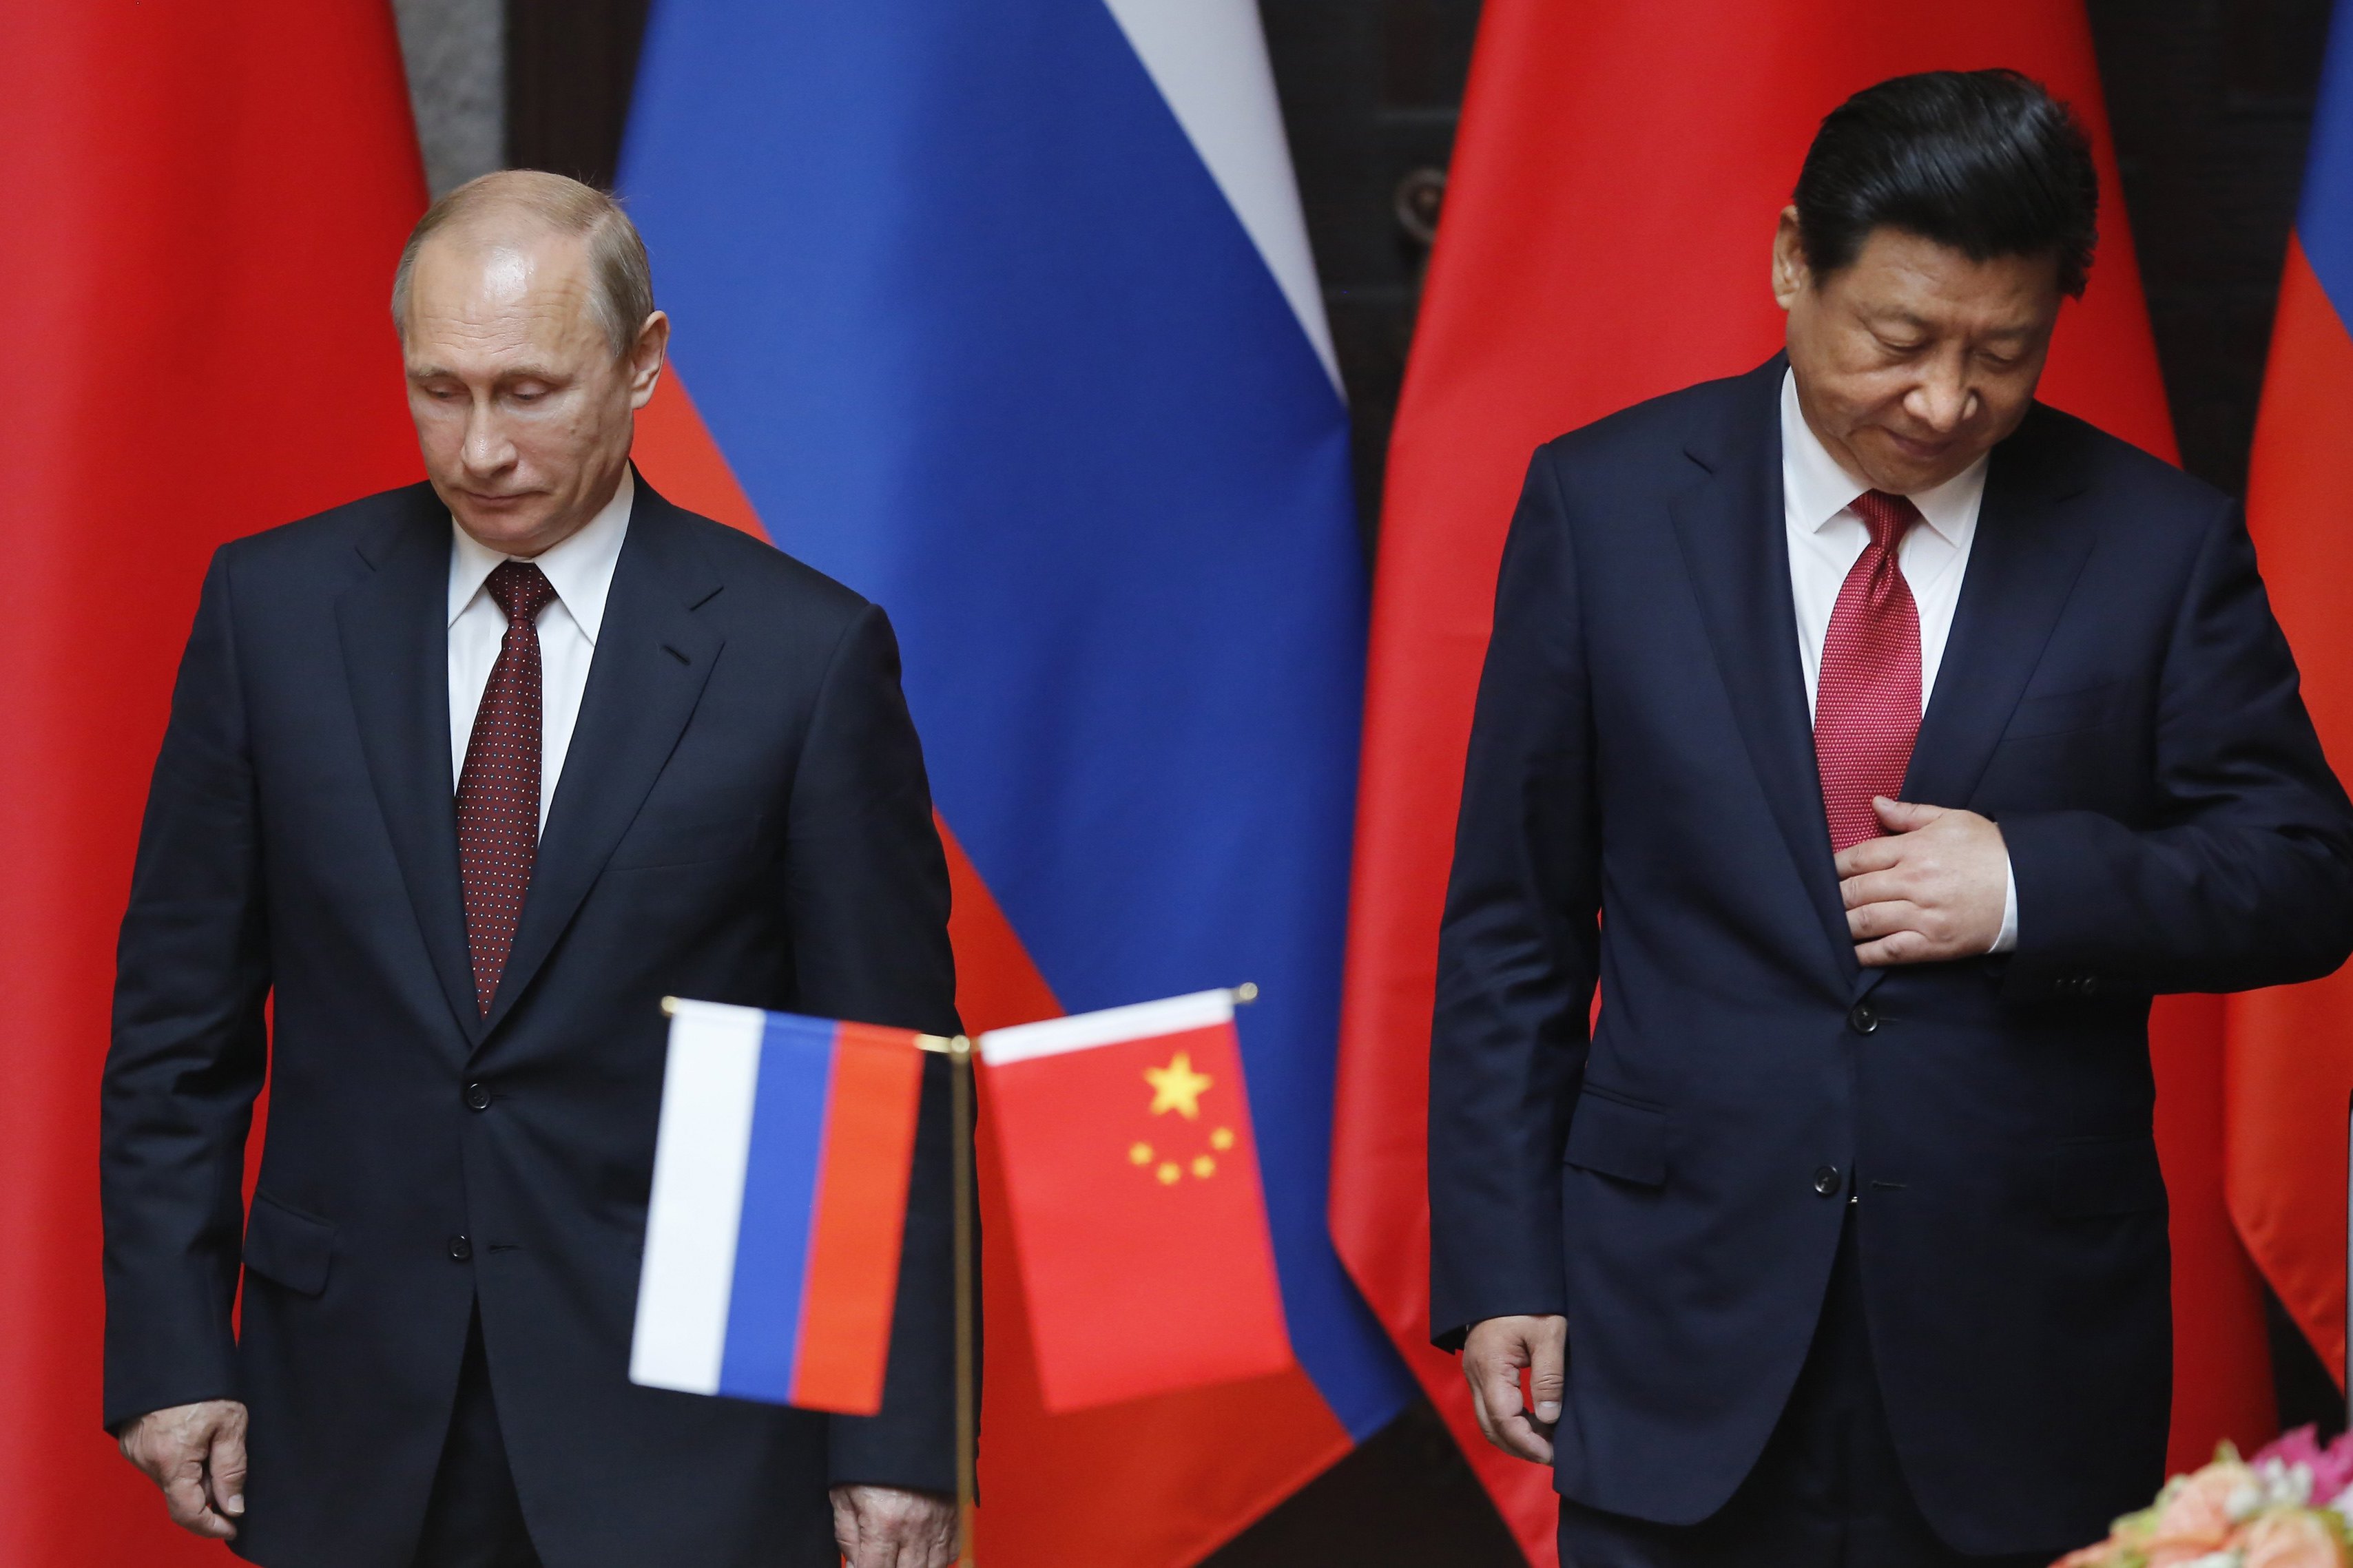 China and Russia: Strategic Relations or Strategic Rivalry?